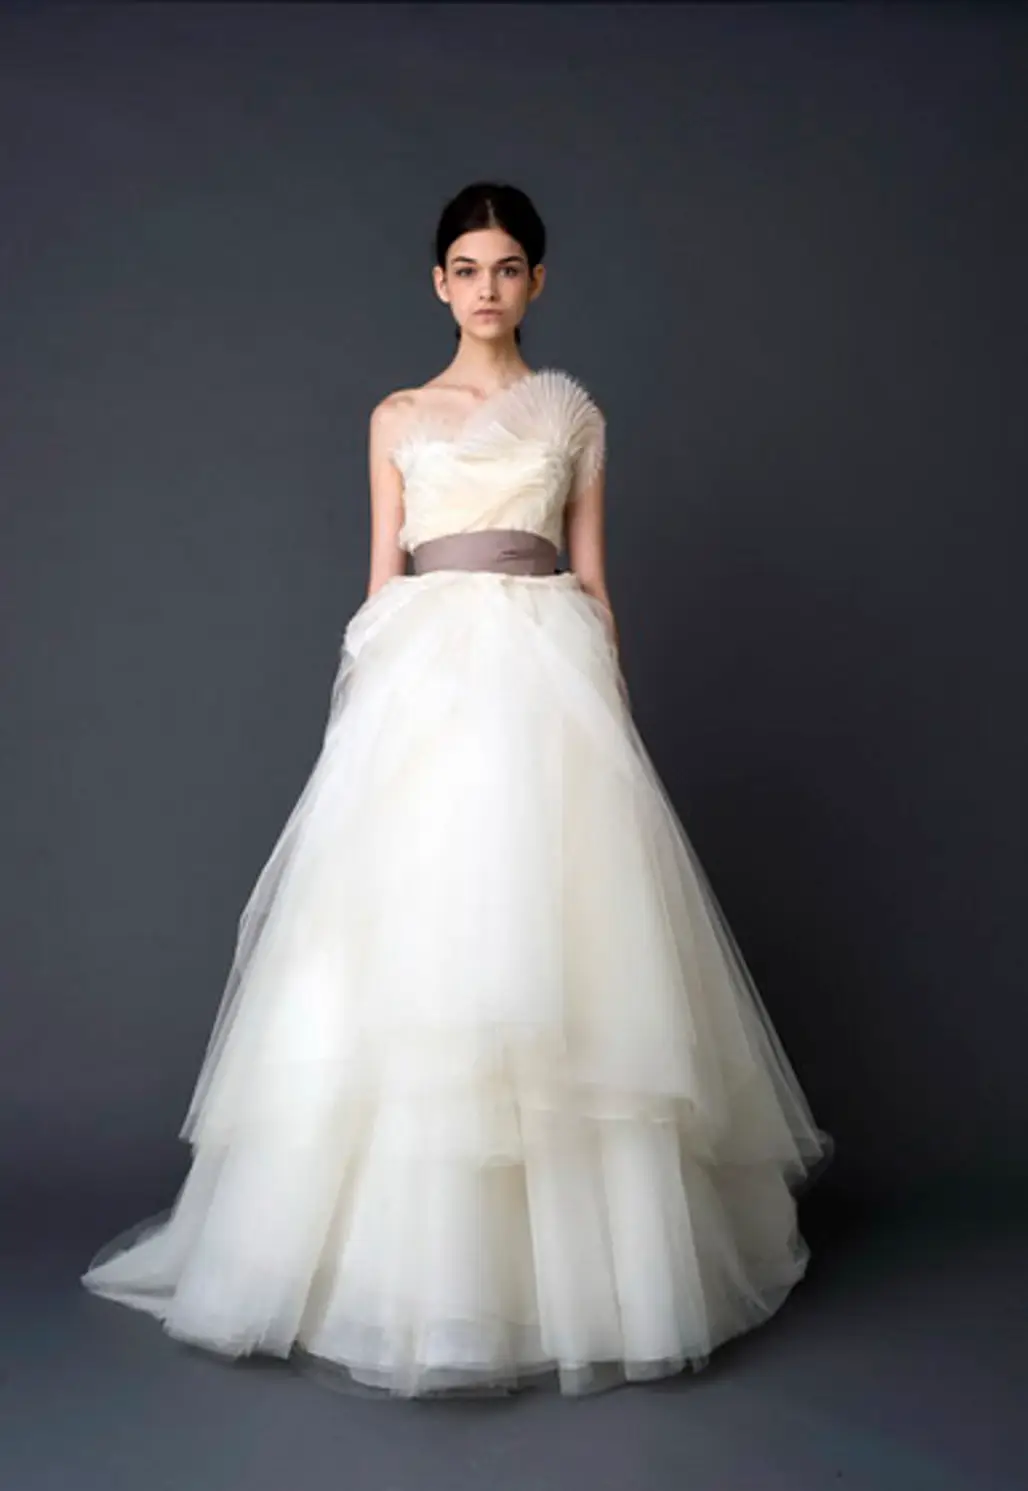 Vera Wang "Hazel" Ivory Ballerina Ballgown with Pleated Bodice and Tiered Skirt